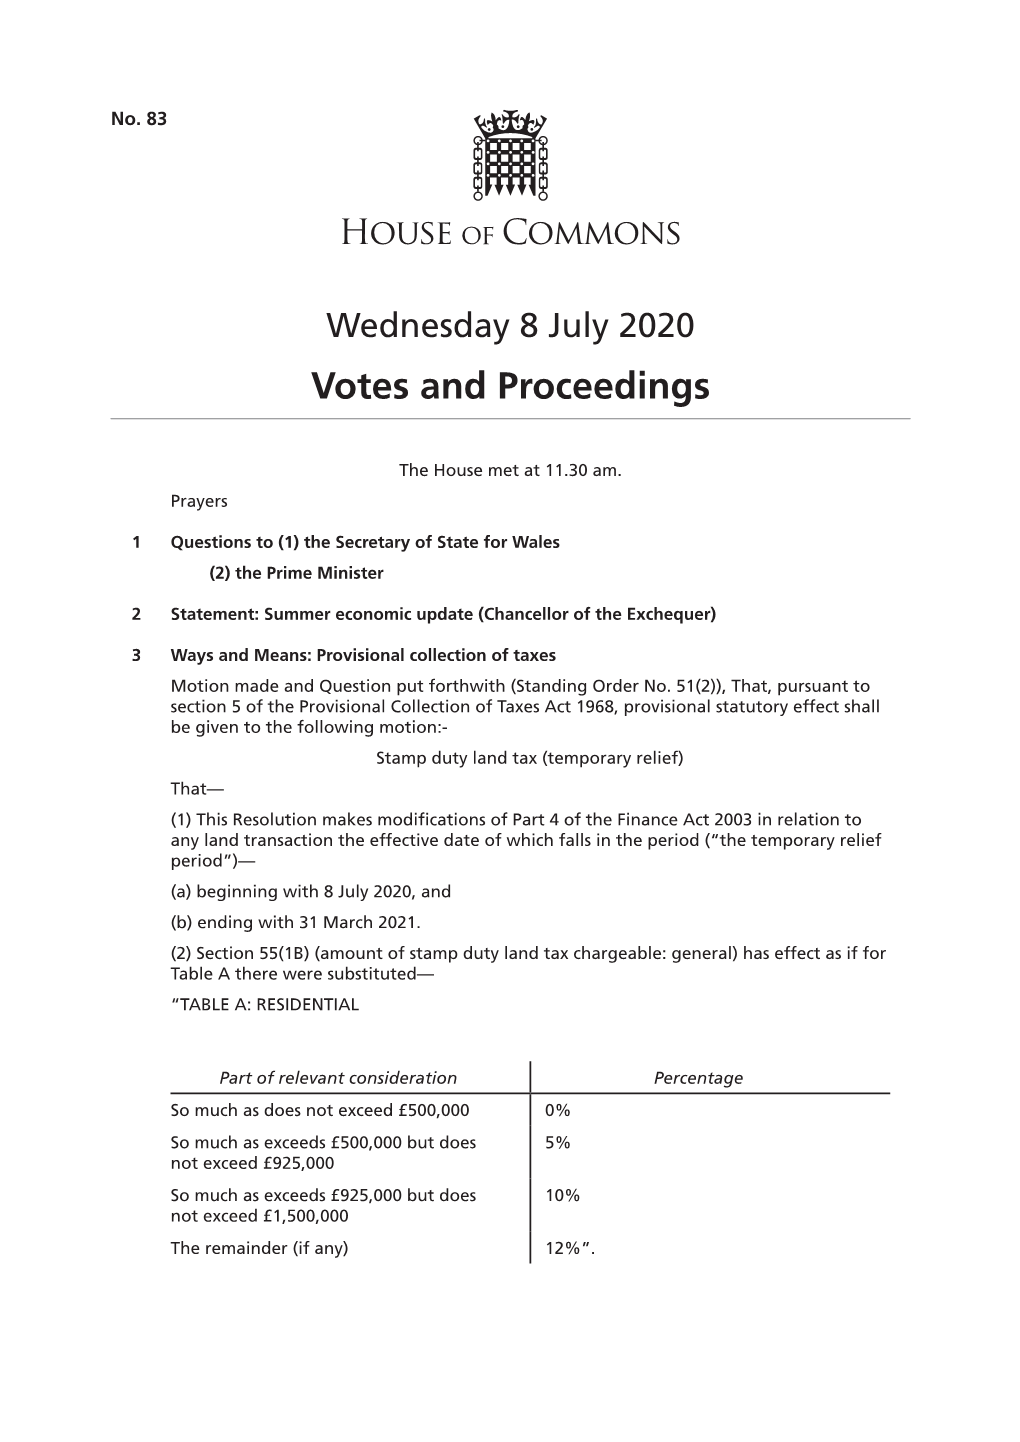 Votes and Proceedings for 8 Jul 2020